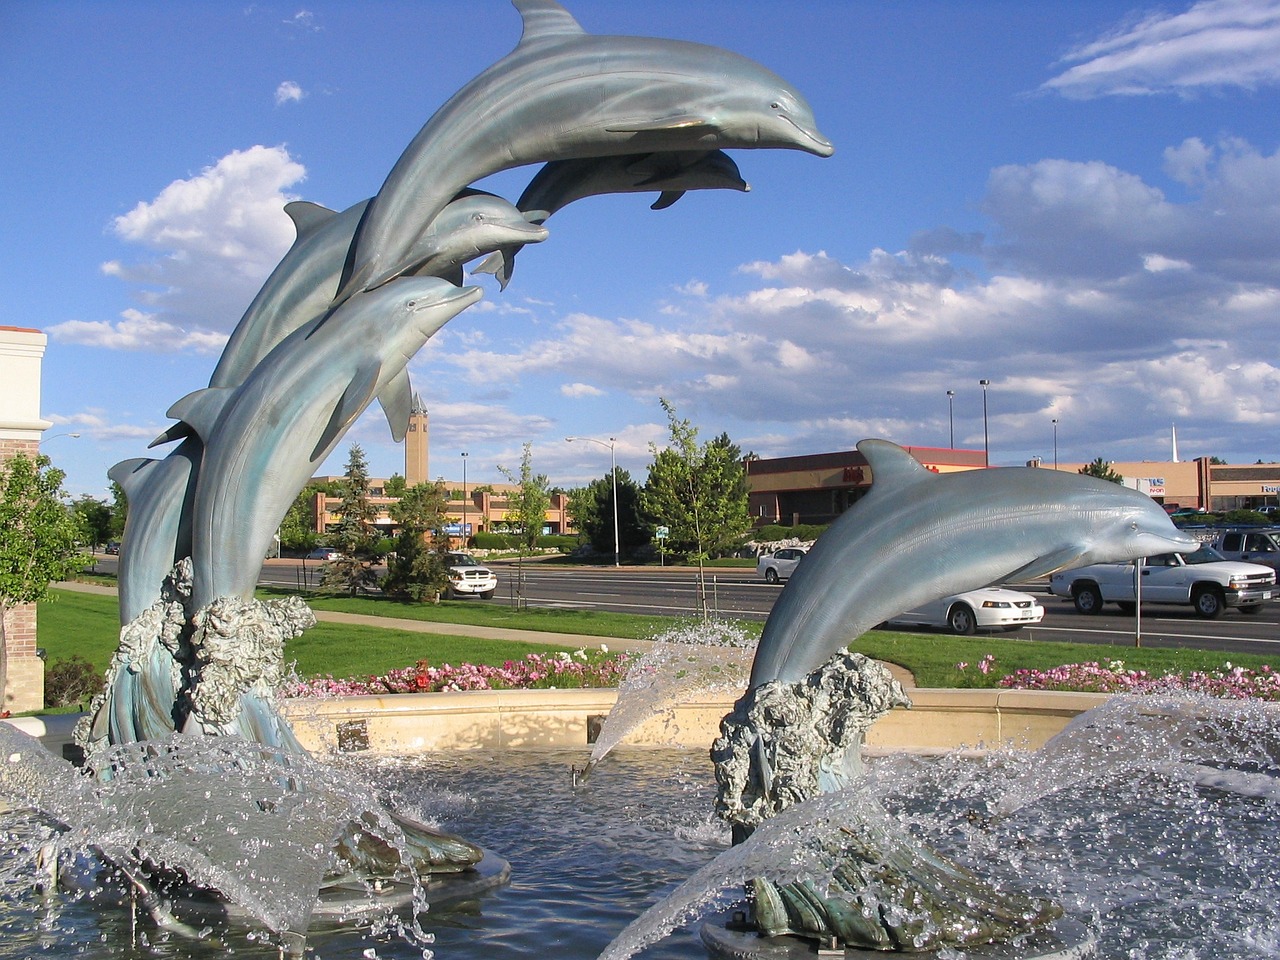 What are the best months to visit Denver Colorado?